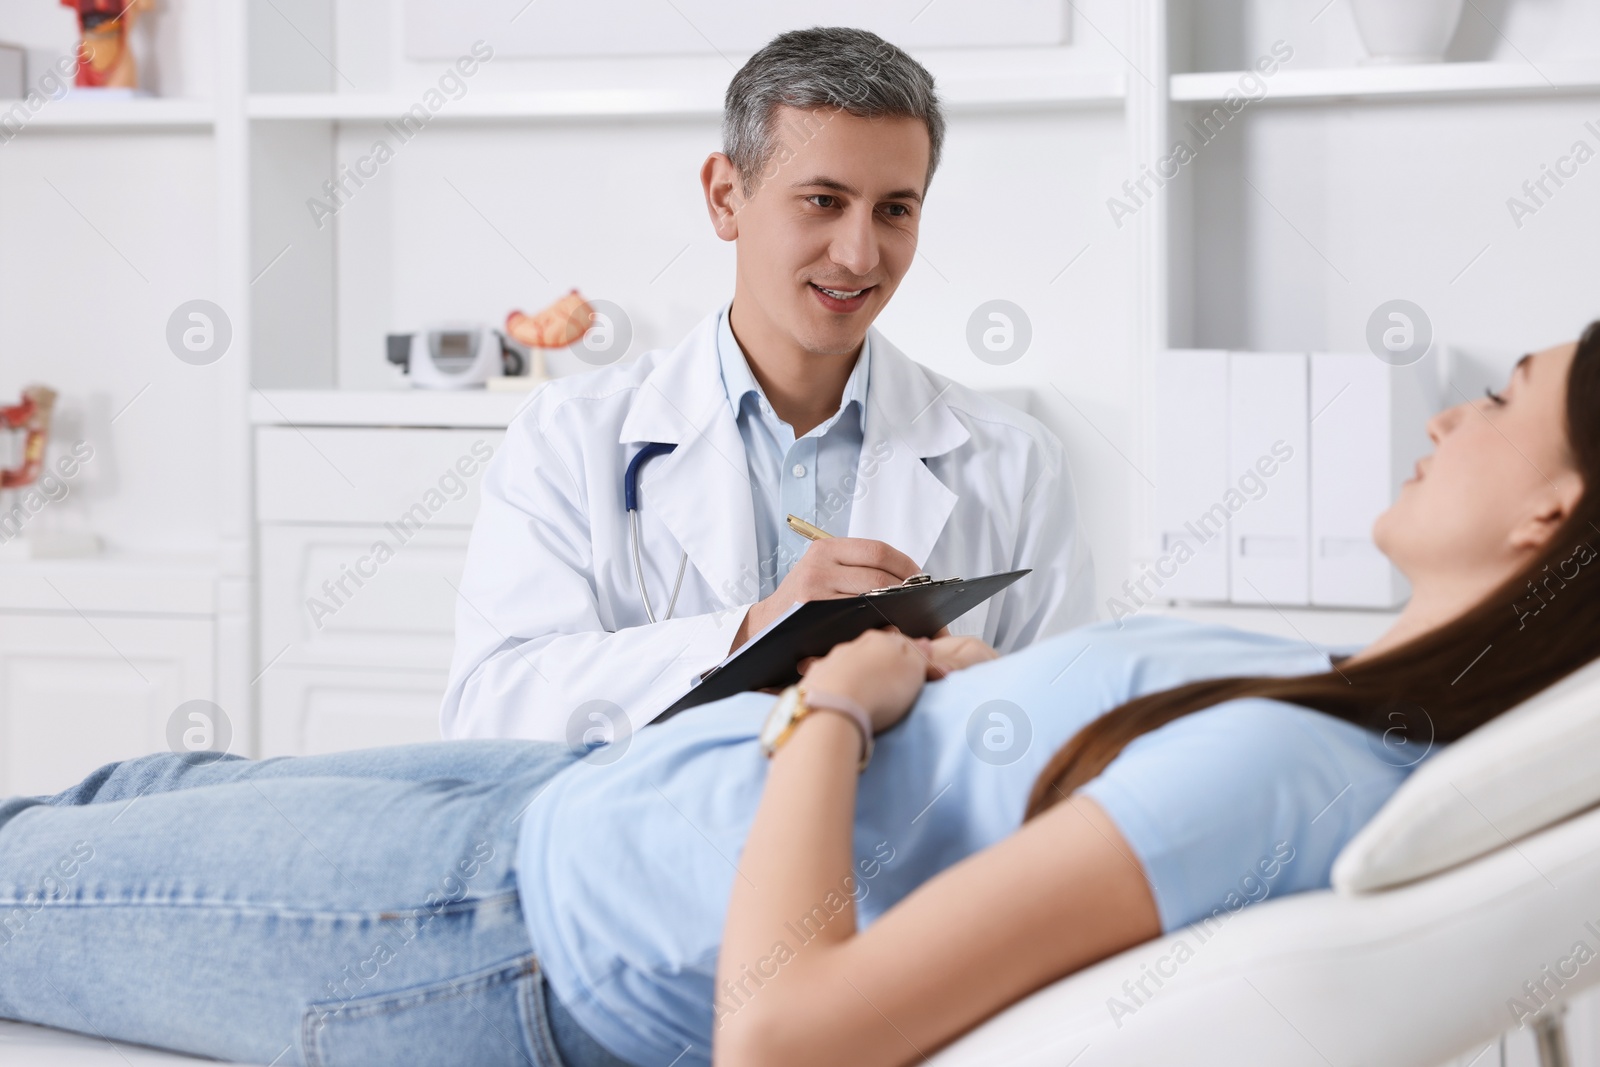 Photo of Gastroenterologist with clipboard consulting patient in clinic